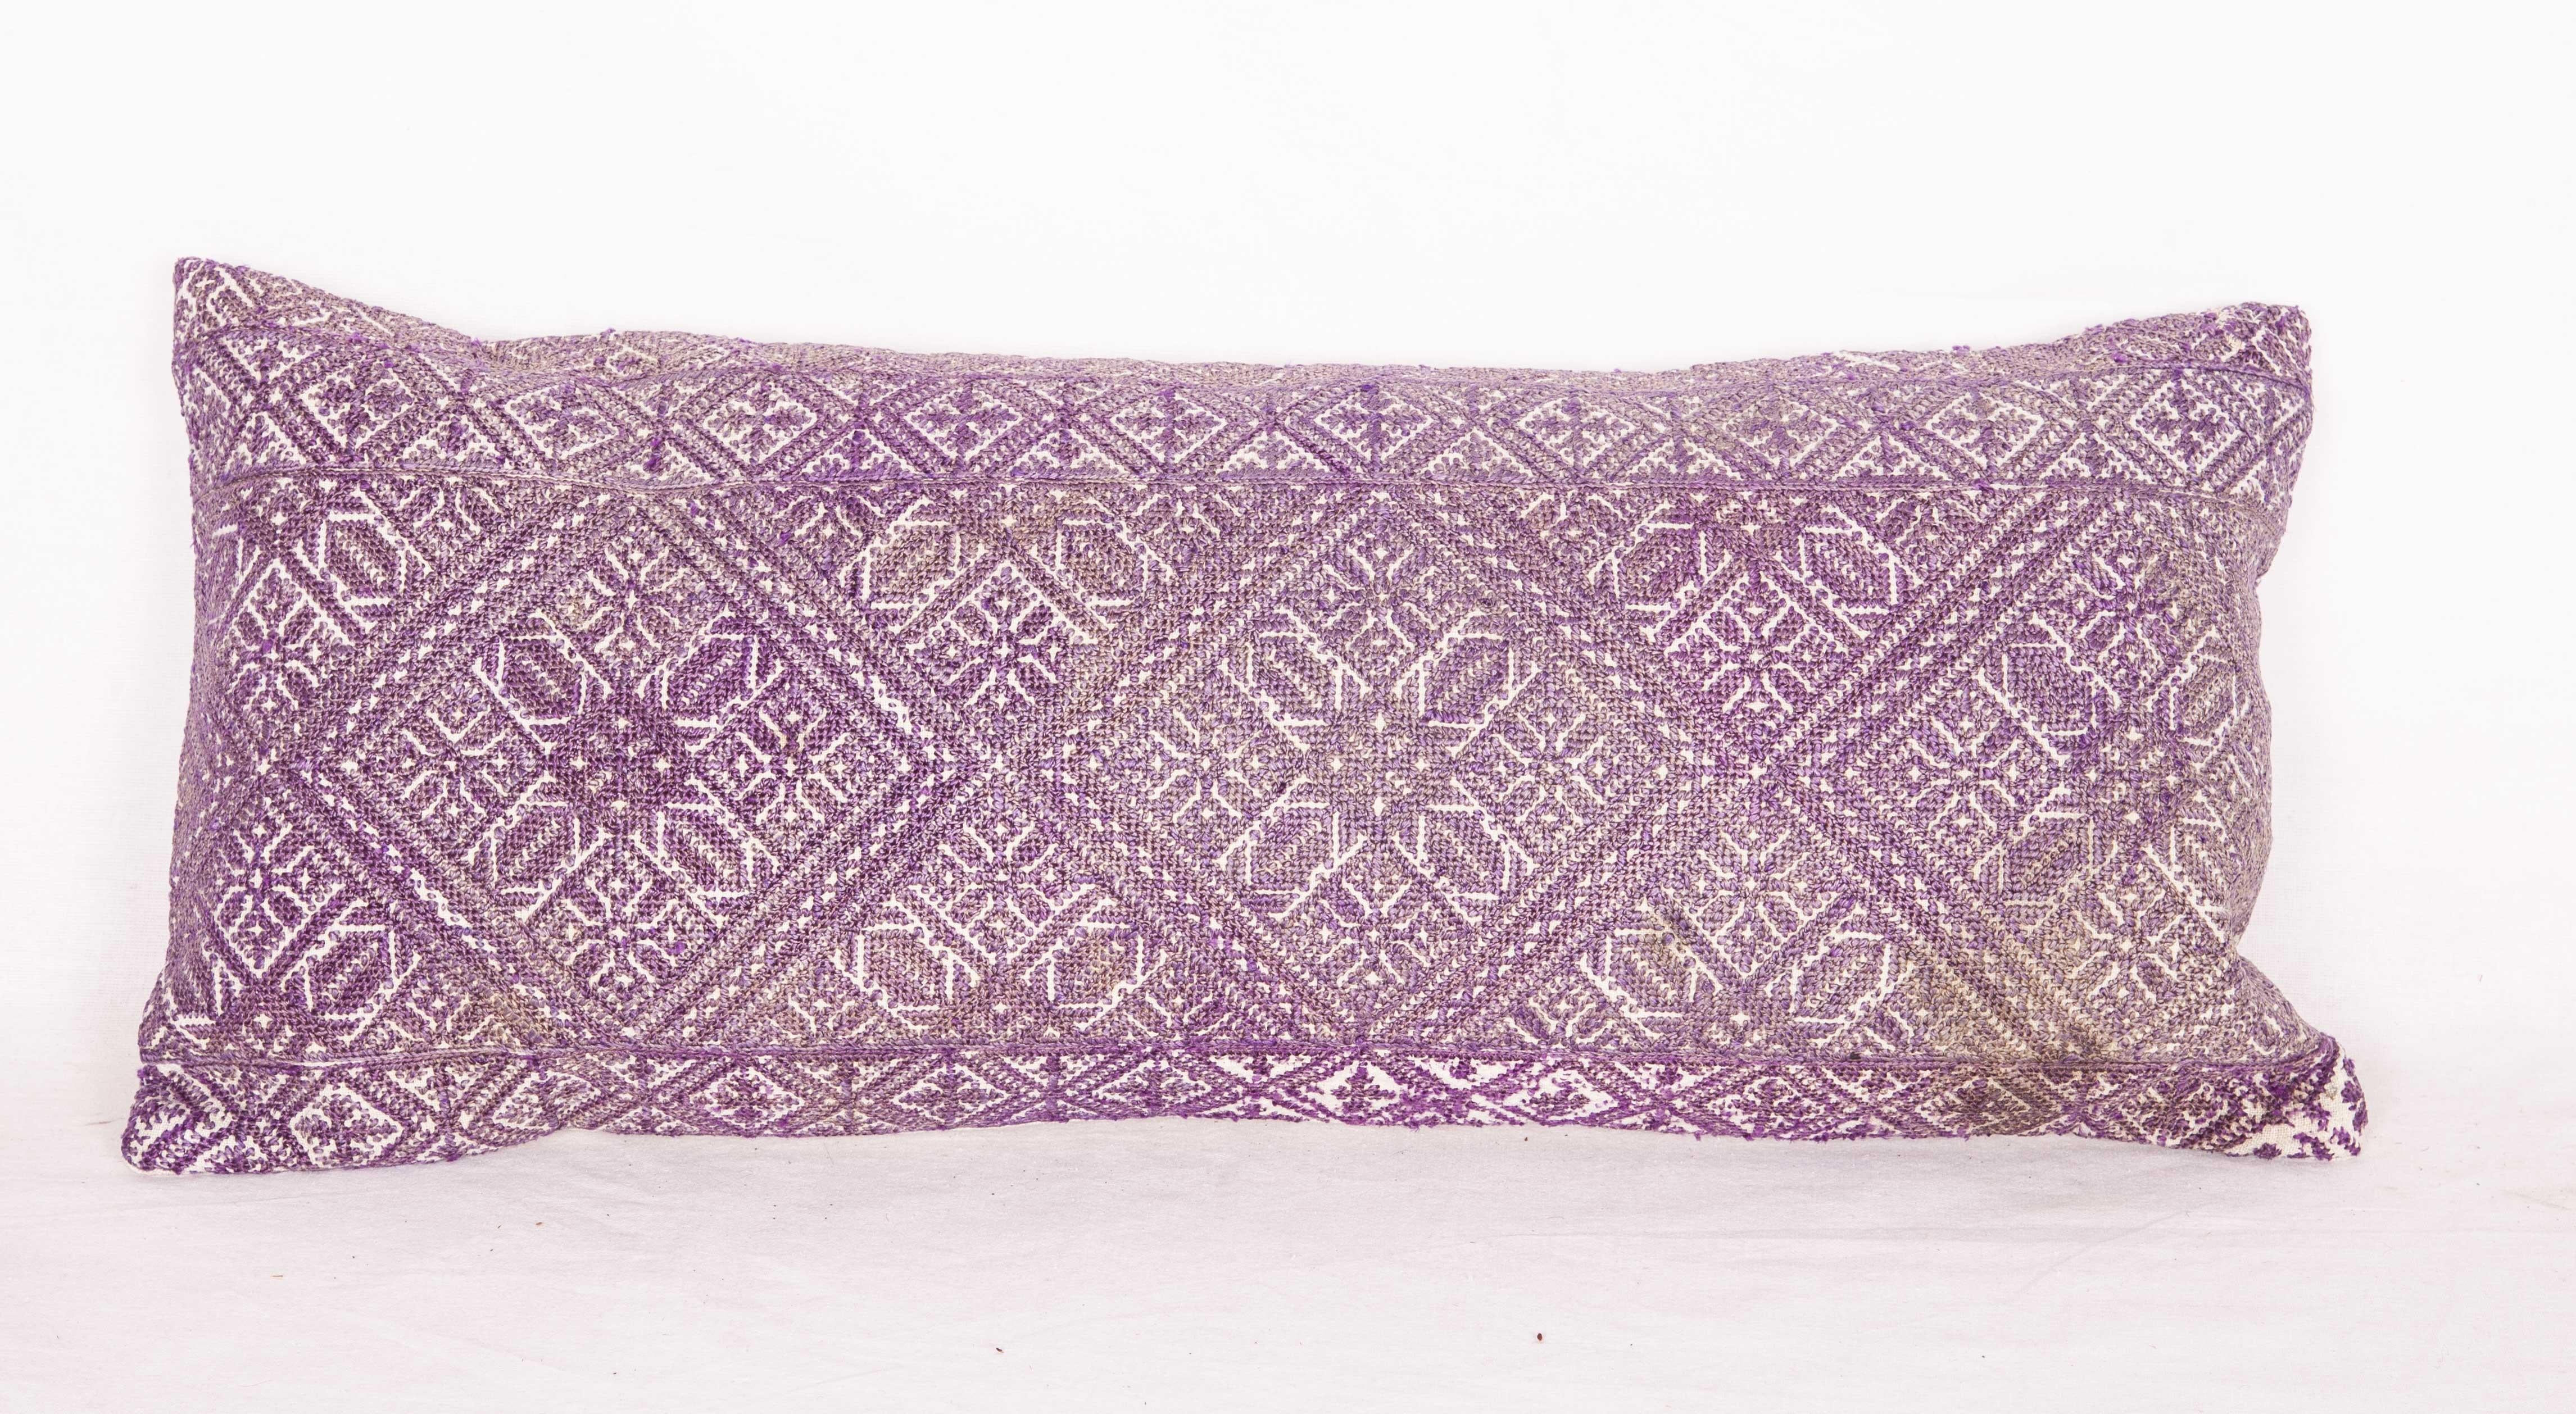 Embroidered Antique Moroccan Pillow Cases Fashioned from a Fez Embroidery Early 20th Century